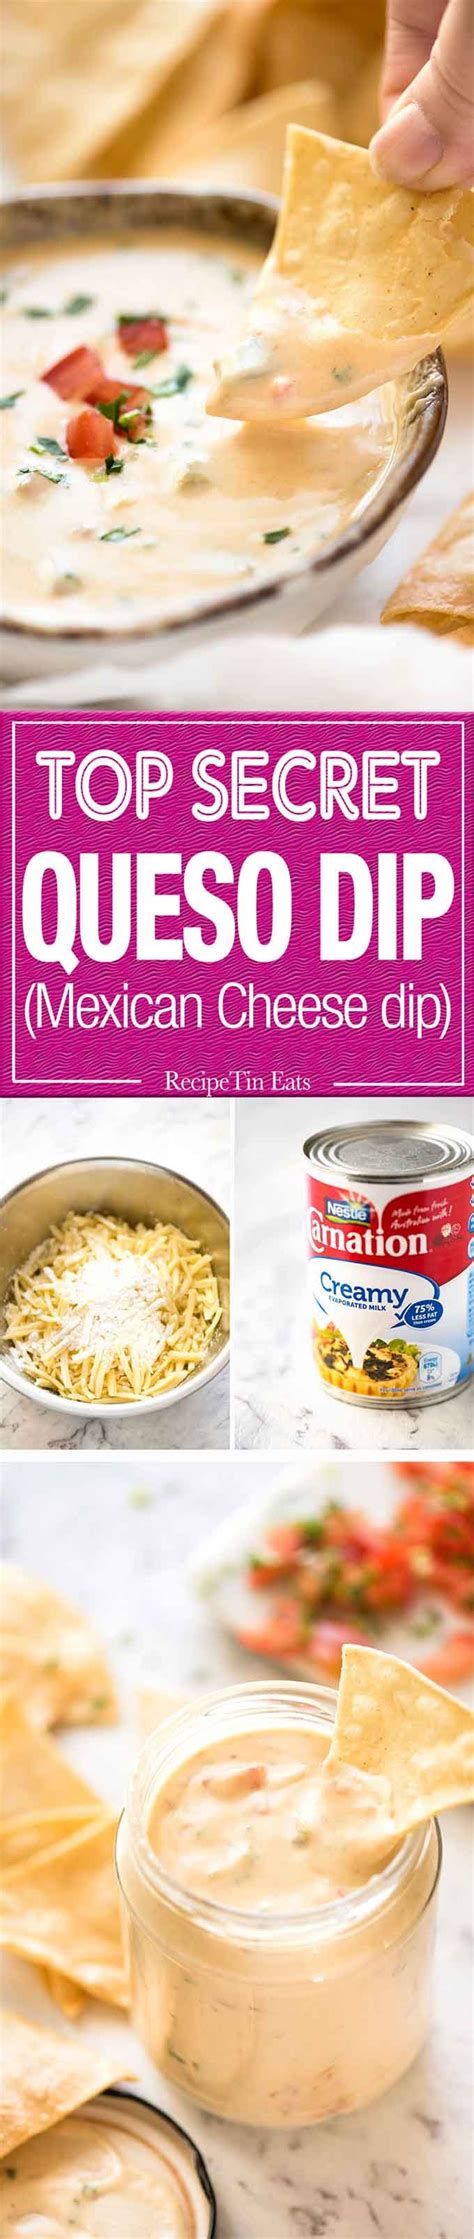 Life Changing Queso Dip Mexican Cheese Dip Recipe Recipes